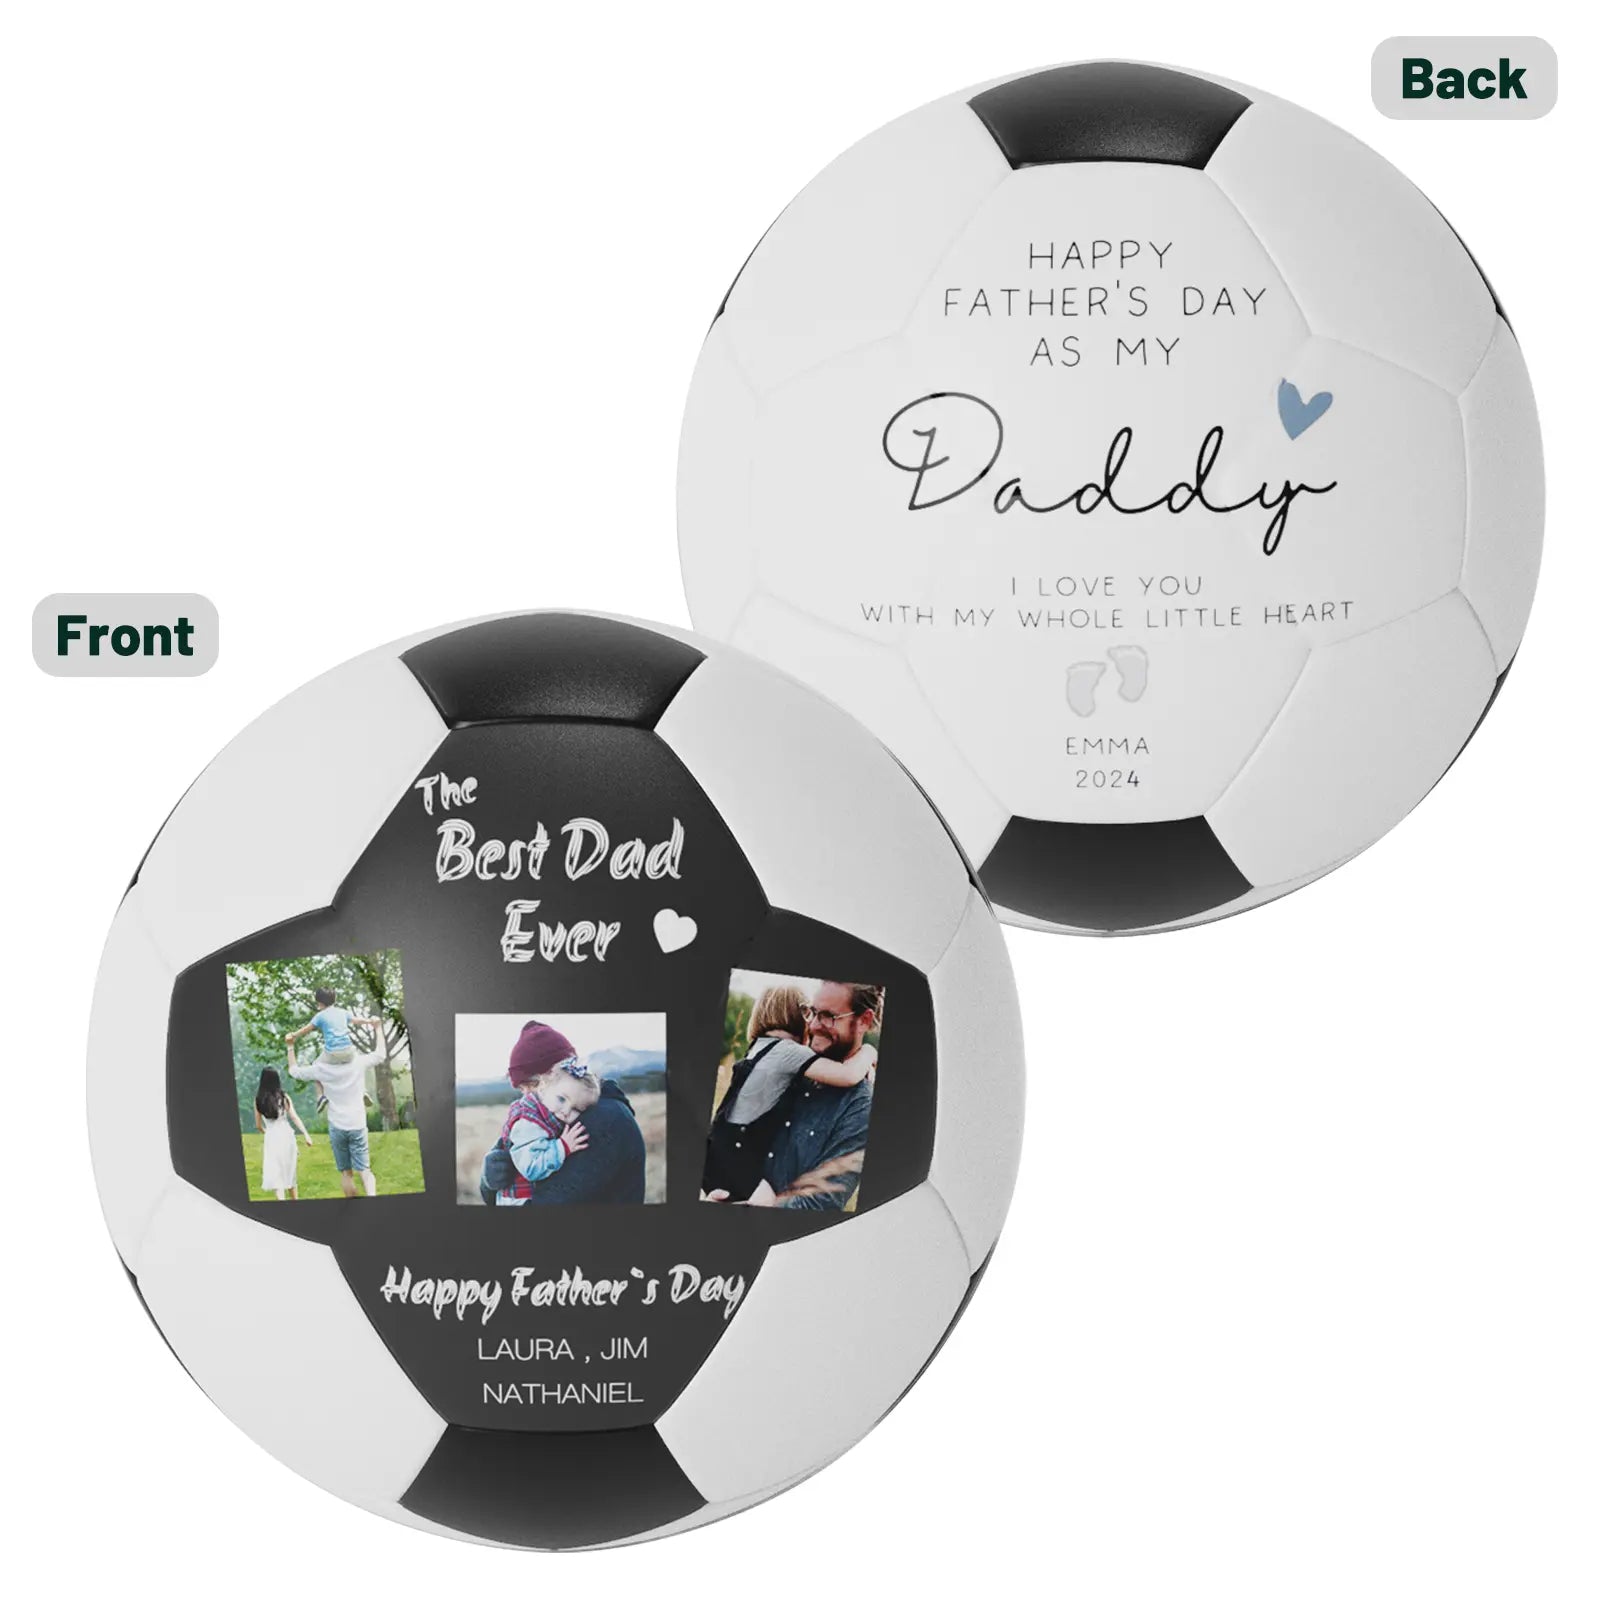 Personalized Custom Knight Photo Soccer Ball Gifts For Dad,Grandpa,Son,Grandson - Family Watchs